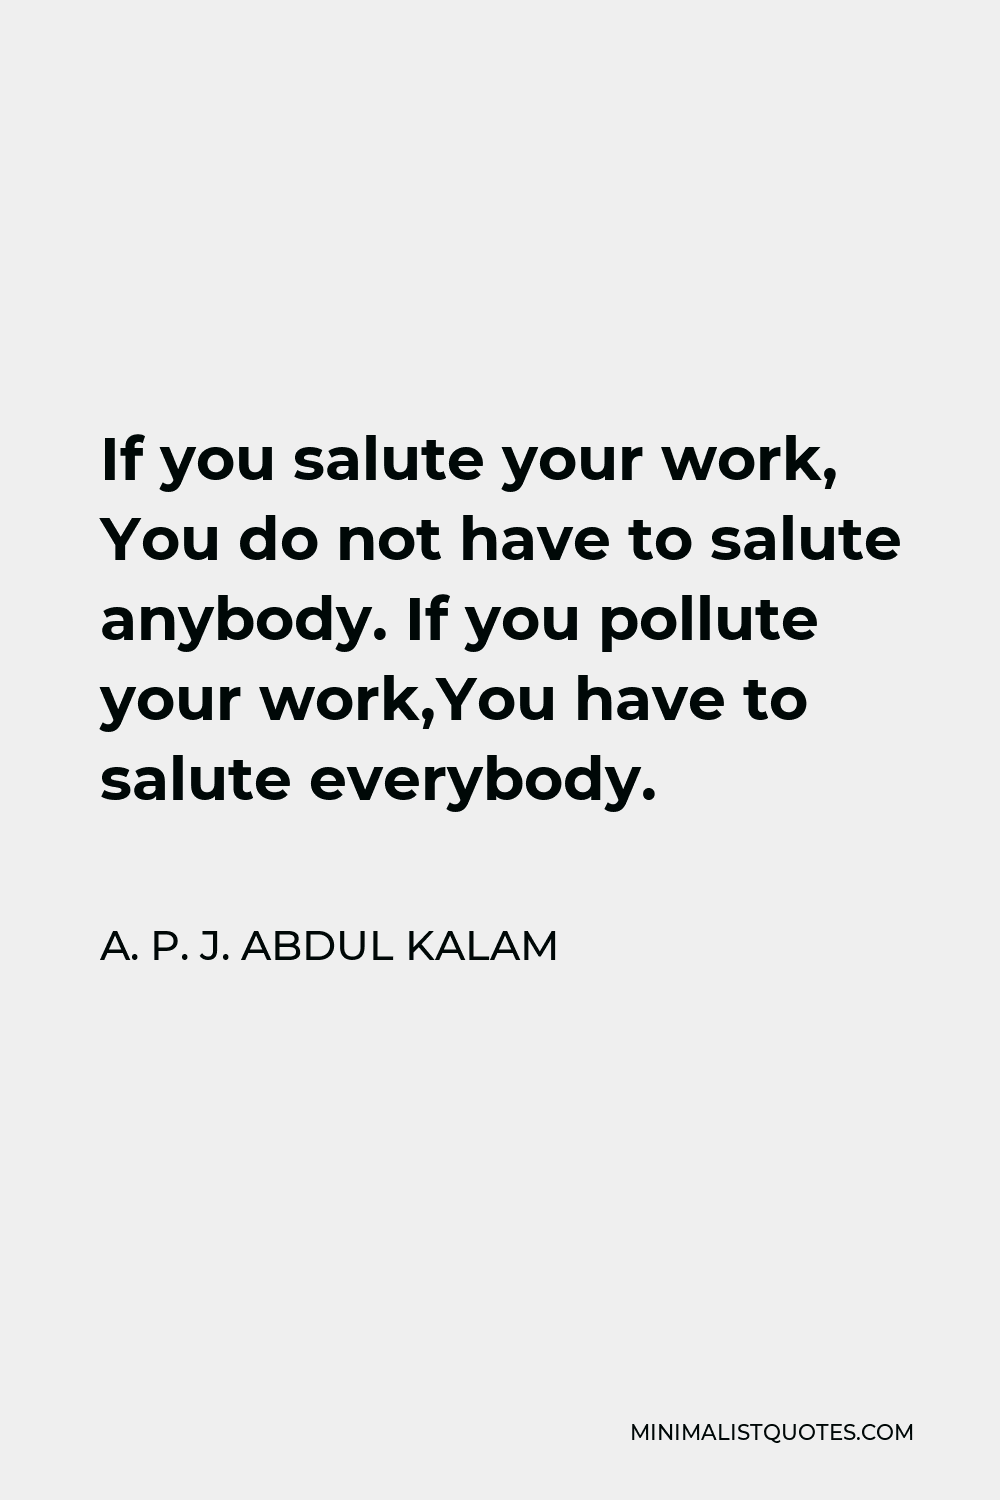 A. P. J. Abdul Kalam Quote - If you salute your work, You do not have to salute anybody. If you pollute your work,You have to salute everybody.